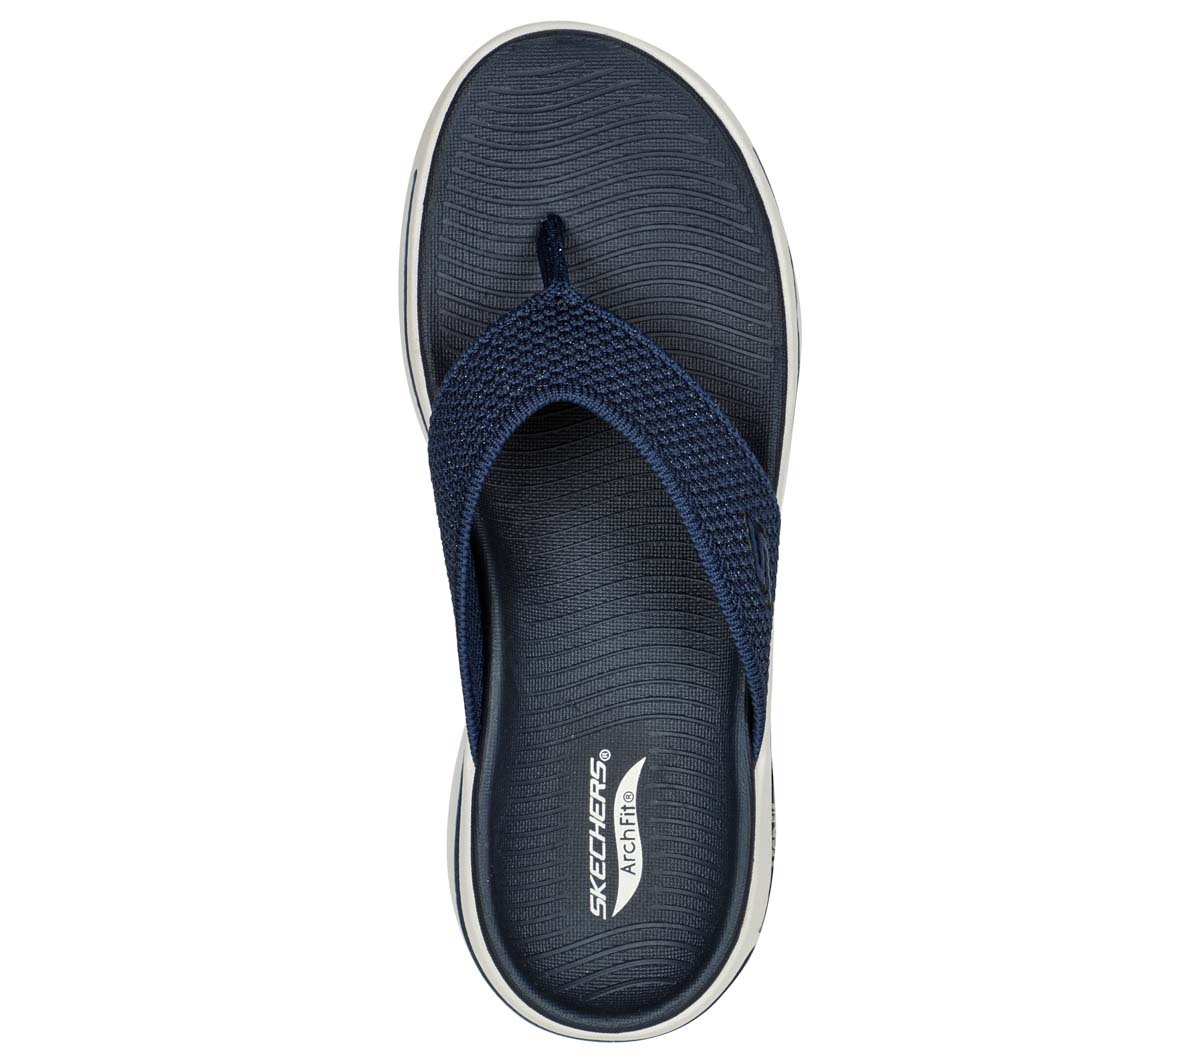 Skechers Arch Fit Go Walk Toe Post 140269 NVY Navy Toe Post Sandals